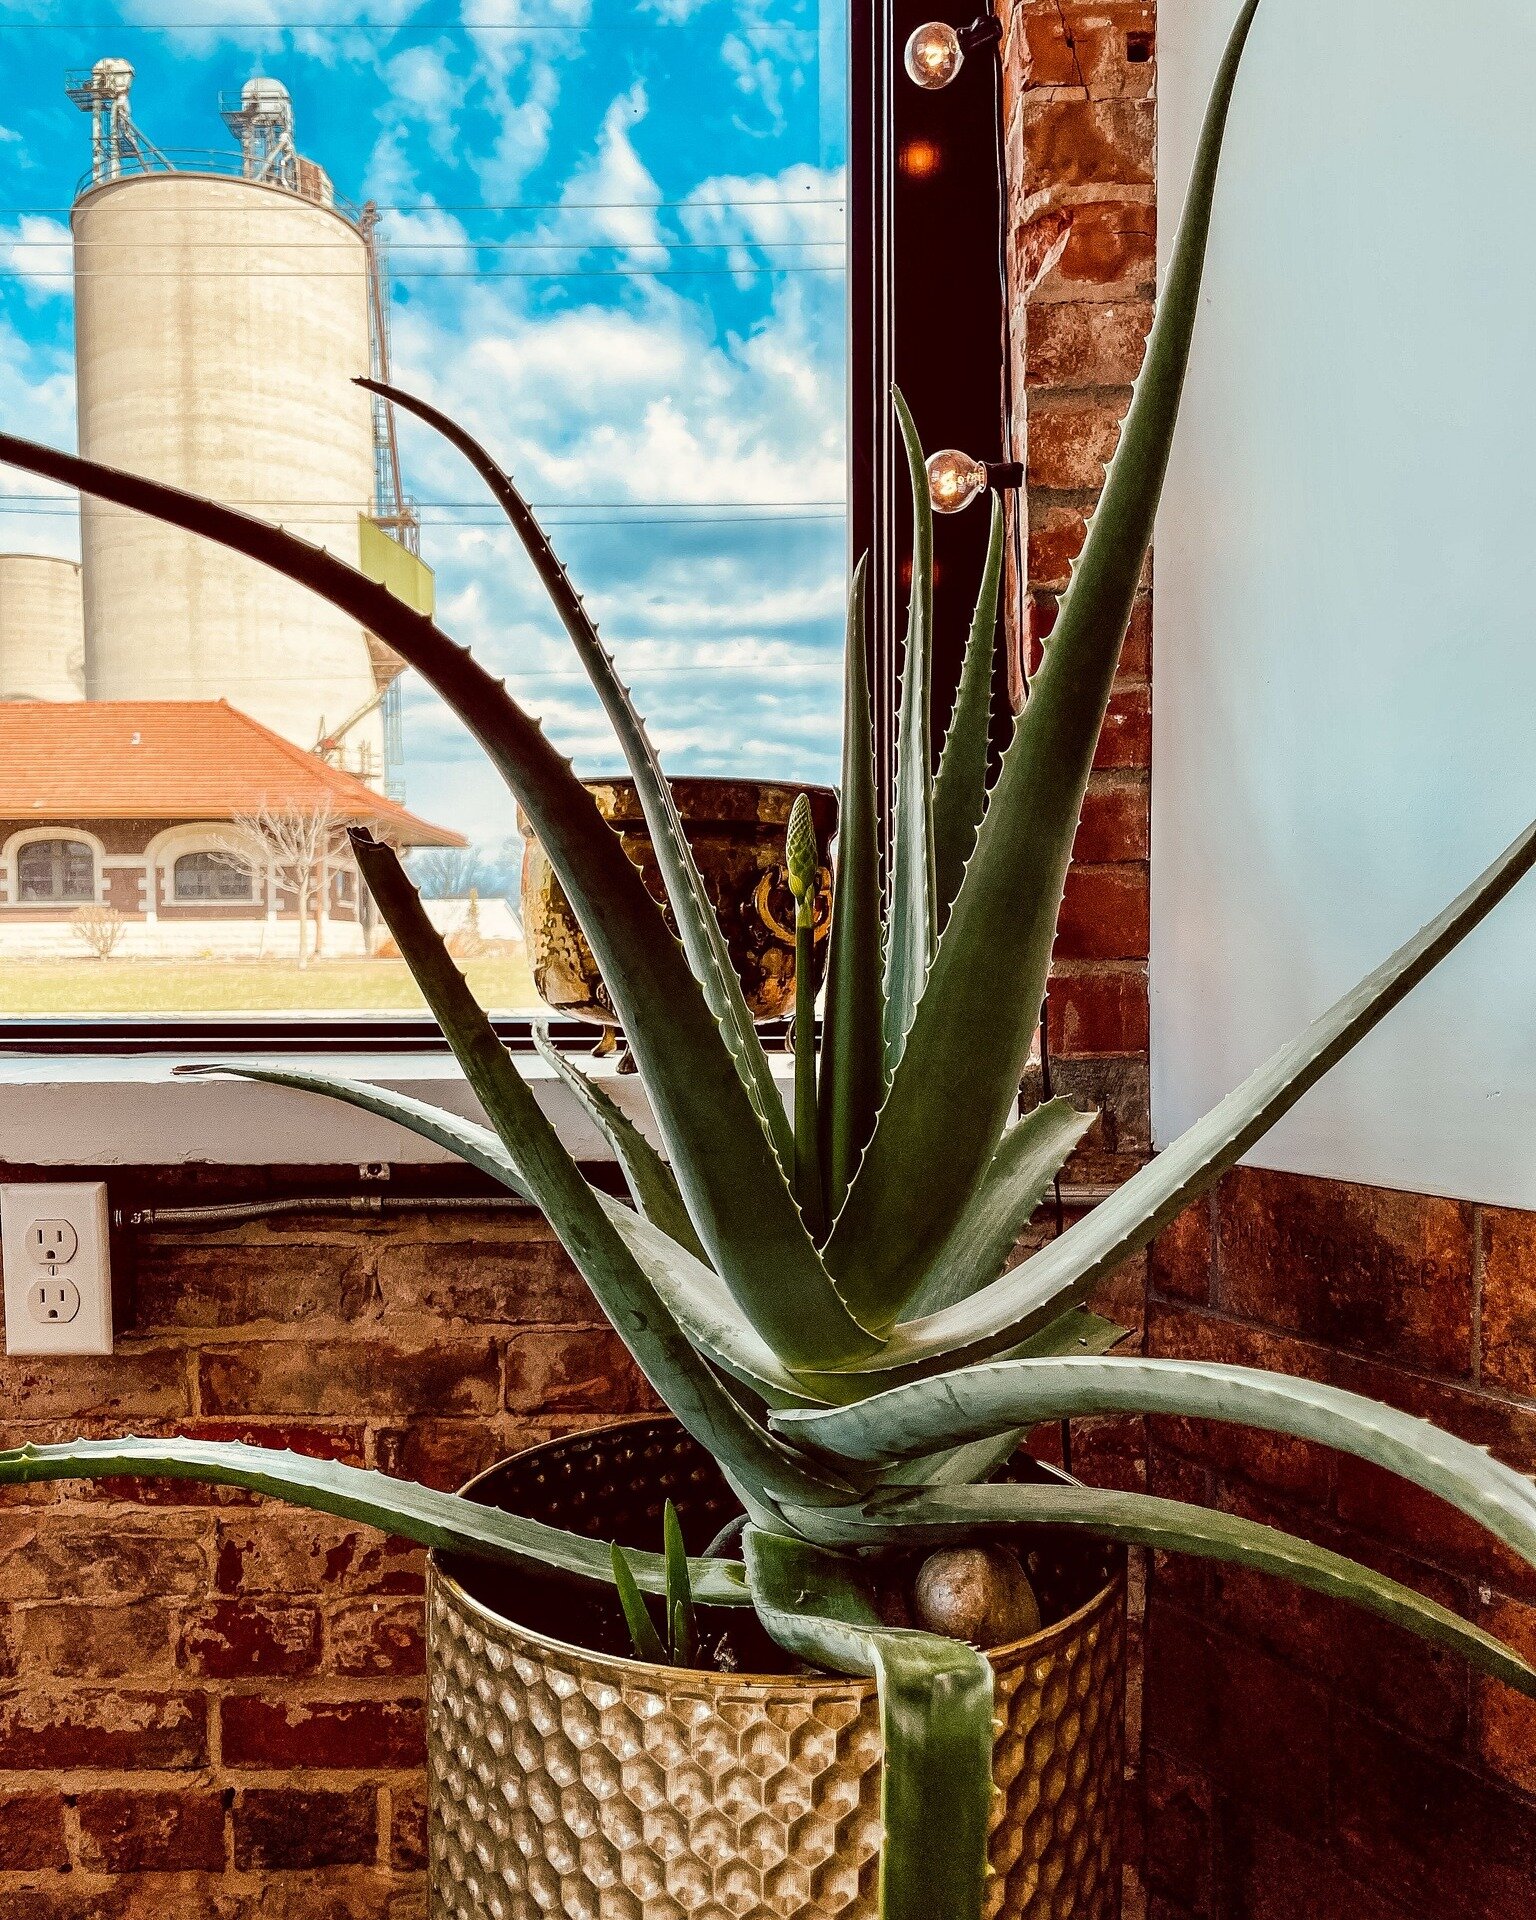 It's time for another Meet-the-Plants-Monday! This is Attila the Aloe. She&rsquo;s been with us since we first opened, so if you&rsquo;ve been in our shop you&rsquo;ve probably seen her. She&rsquo;s a happy plant and we just noticed she's starting to